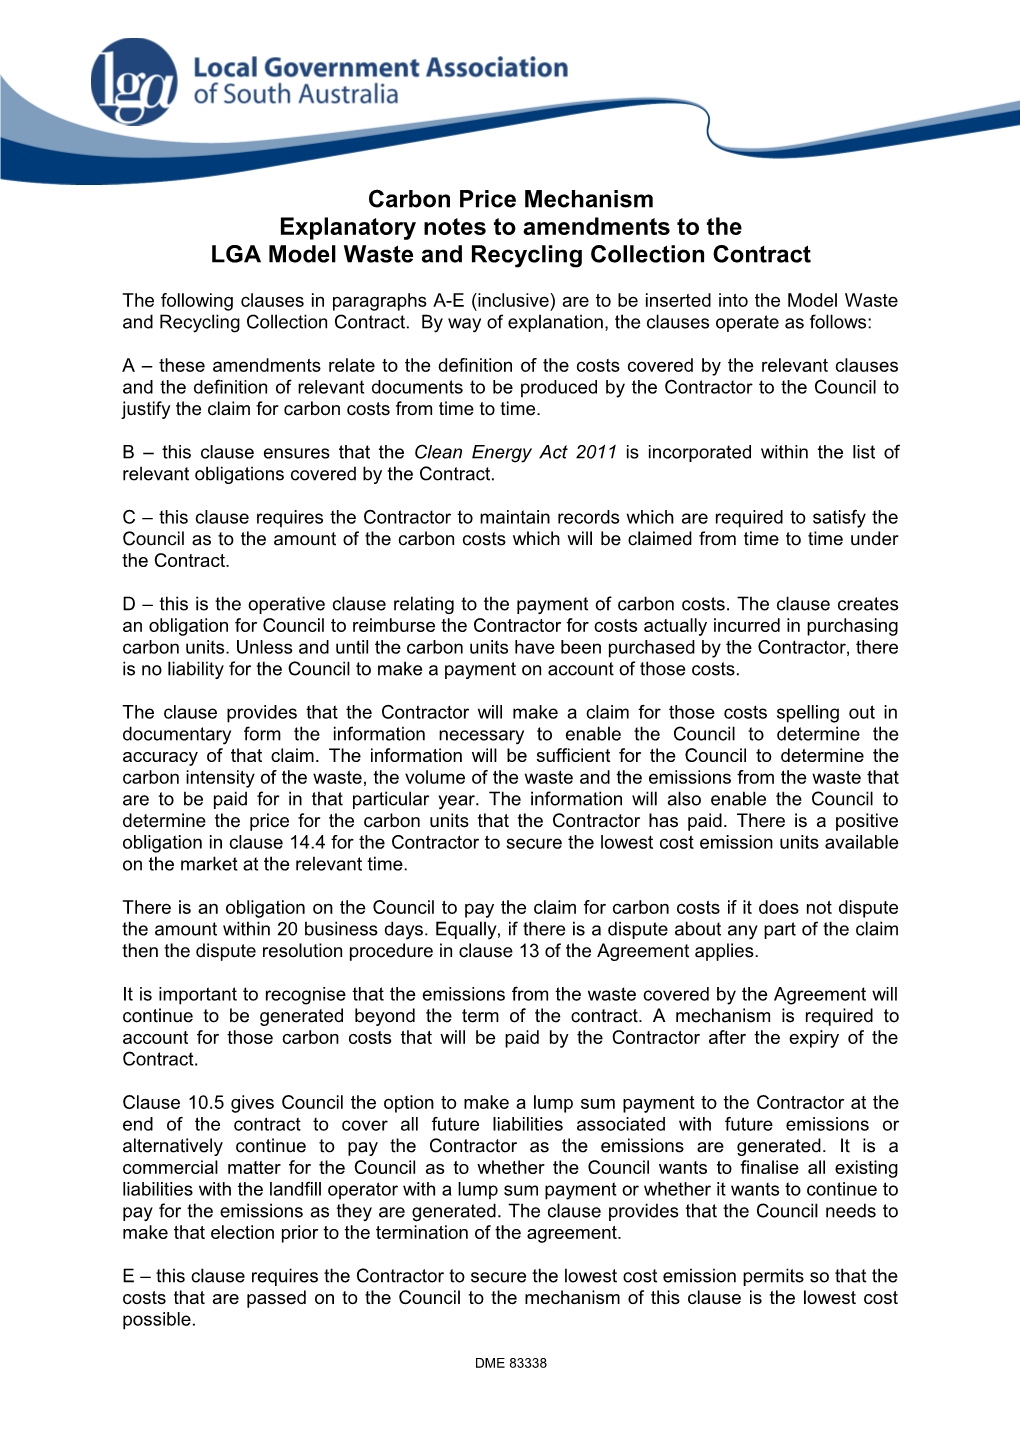 Amendments to the Model Waste and Recycling Collection Contract